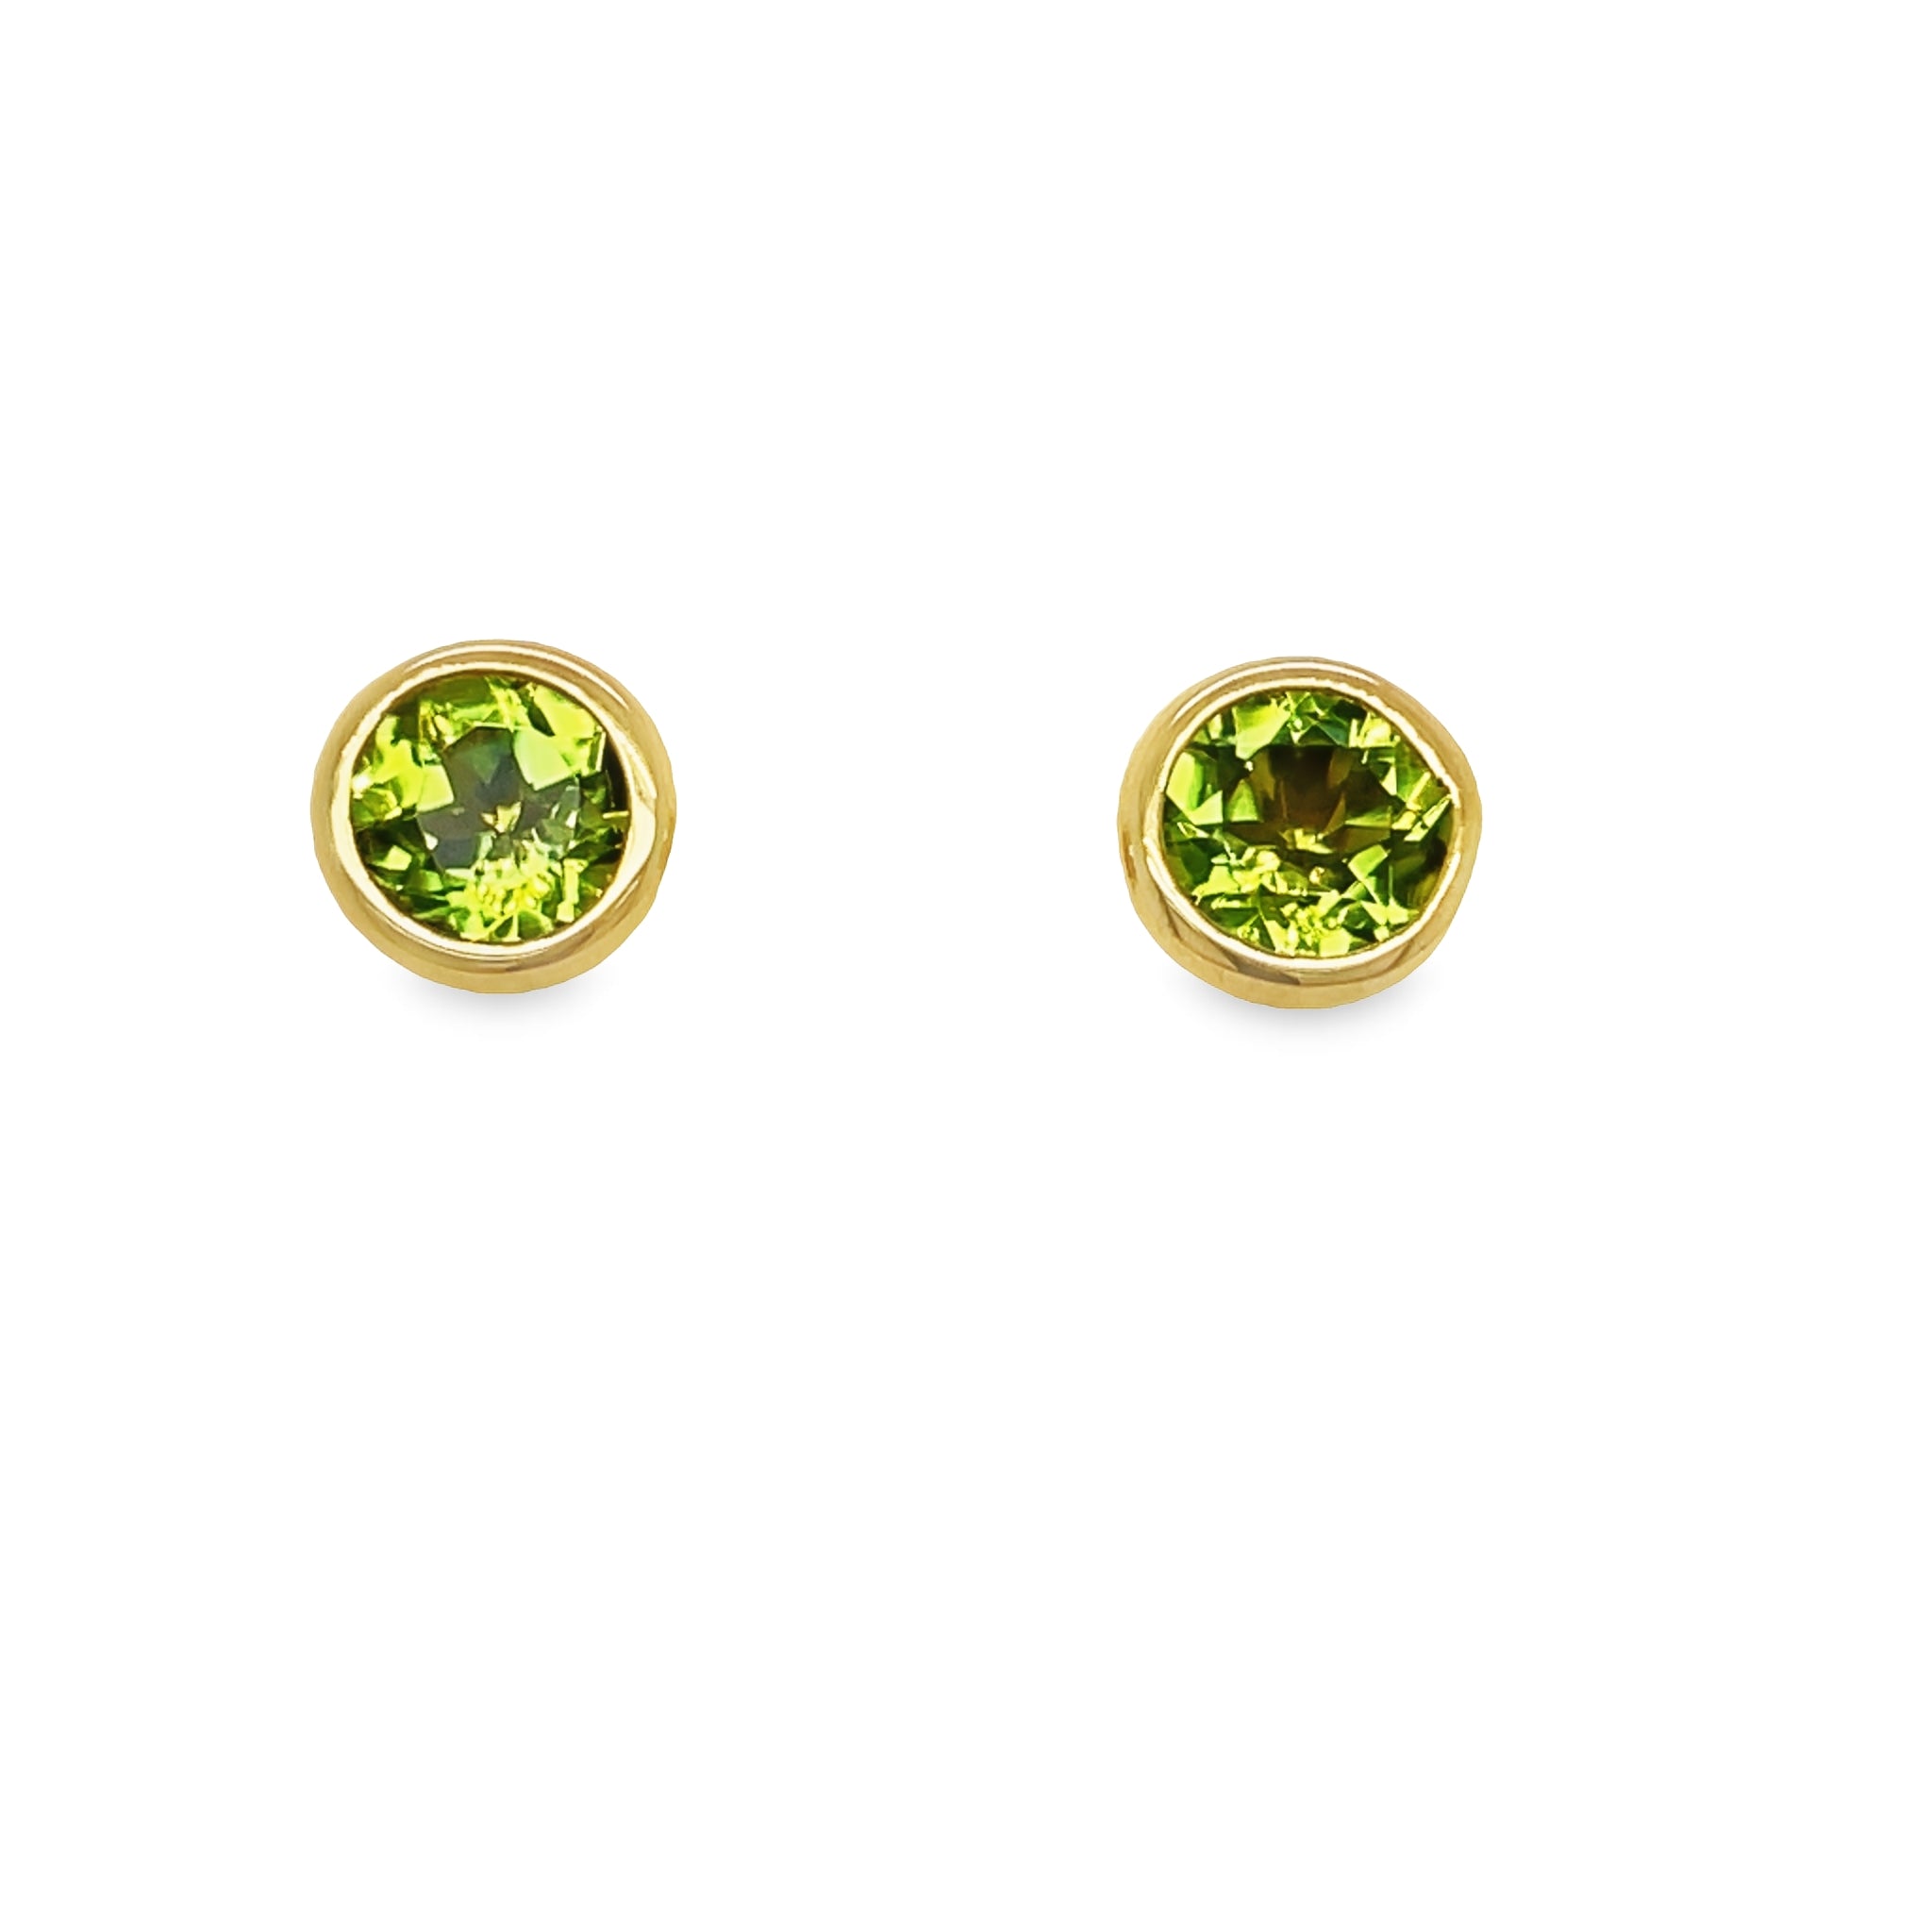 Beautifully crafted in 18k yellow gold, these citrine stud earrings will add a luxurious sparkle to any outfit. The large round peridot are secured with friction backs, ensuring a secure fit that will make you feel confident. Make a bold and sophisticated statement with these stunning earrings!